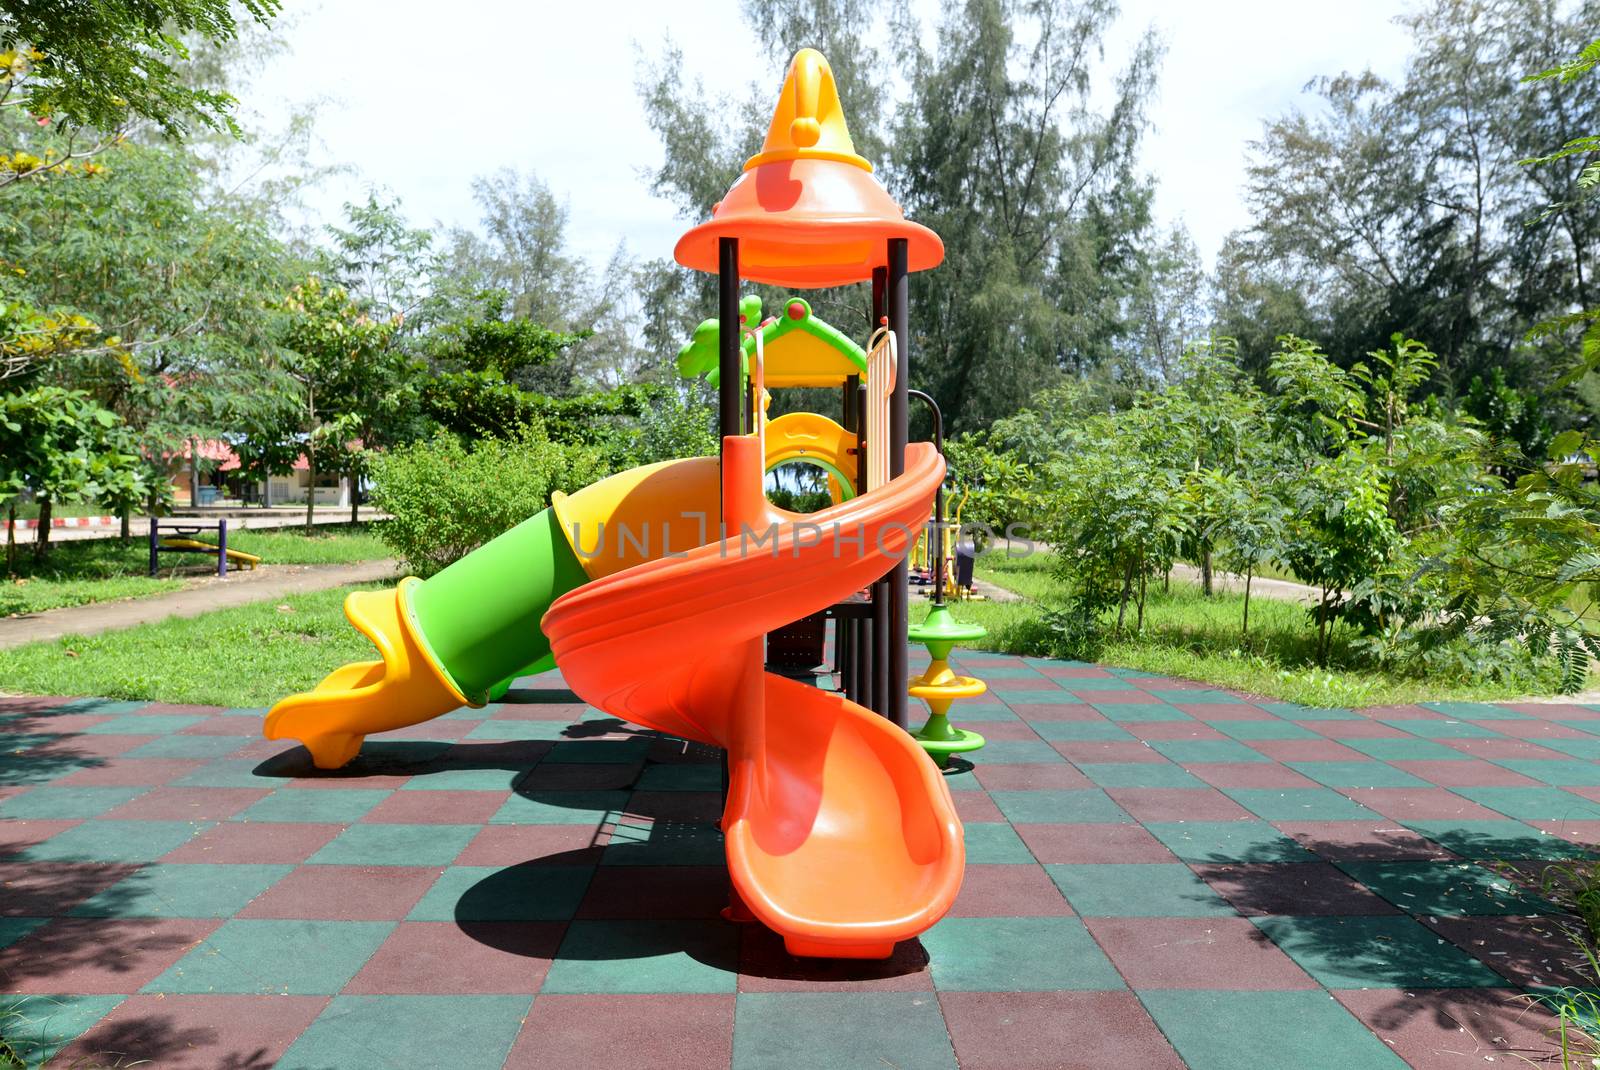 Colorful outdoor children playground in the park During the day.